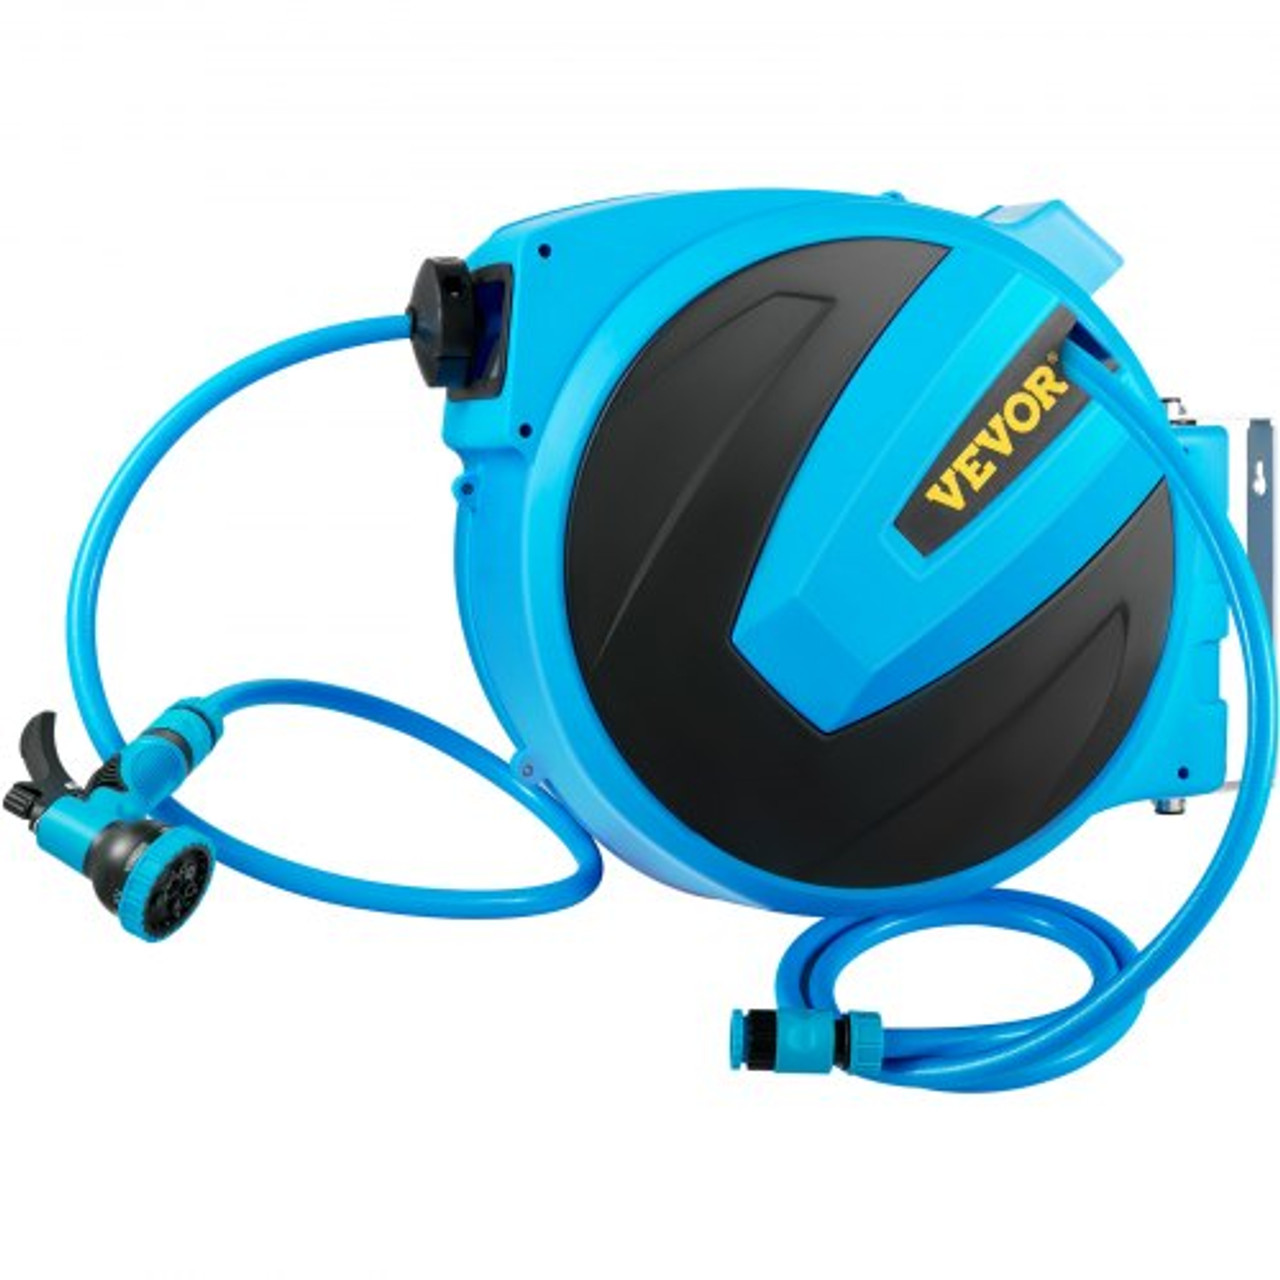 Retractable Hose Reel, 1/2 inch x 85 ft, Any Length Lock & Automatic Rewind  Water Hose, Wall Mounted Garden Hose Reel w/ 180ø Swivel Bracket and 7